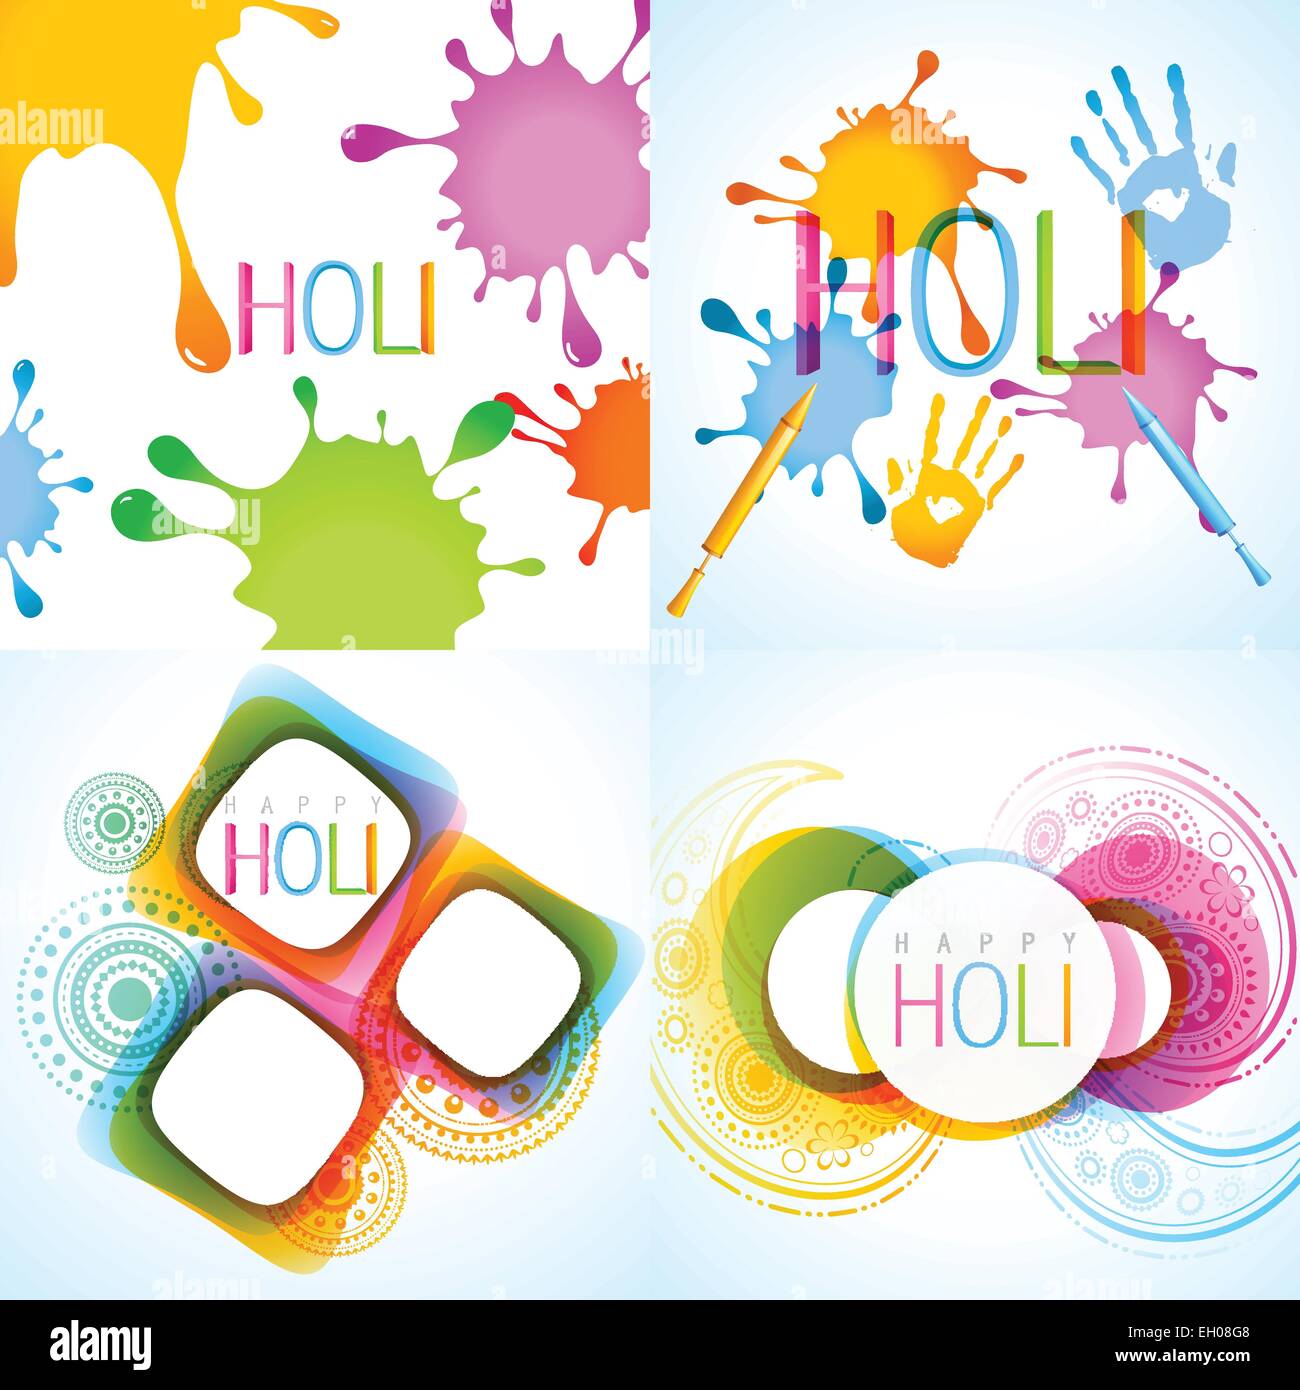 vector colorful set of holi background illustration Stock Vector